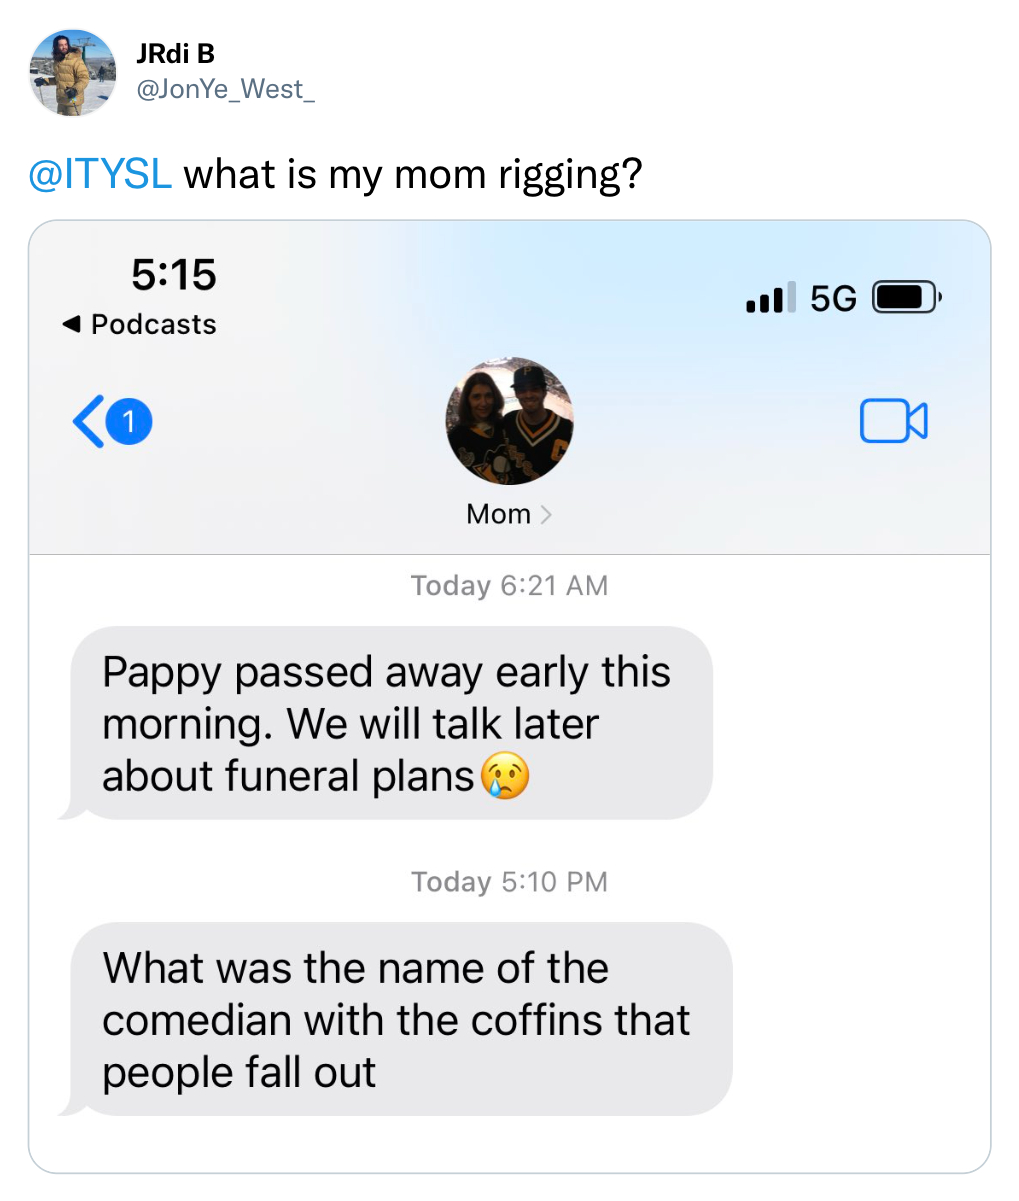 funny tweets - web page - JRdi B what is my mom rigging? Podcasts  Today Pappy passed away early this morning. We will talk later about funeral plans Today What was the name of the comedian with the coffins that people fall out .5G K